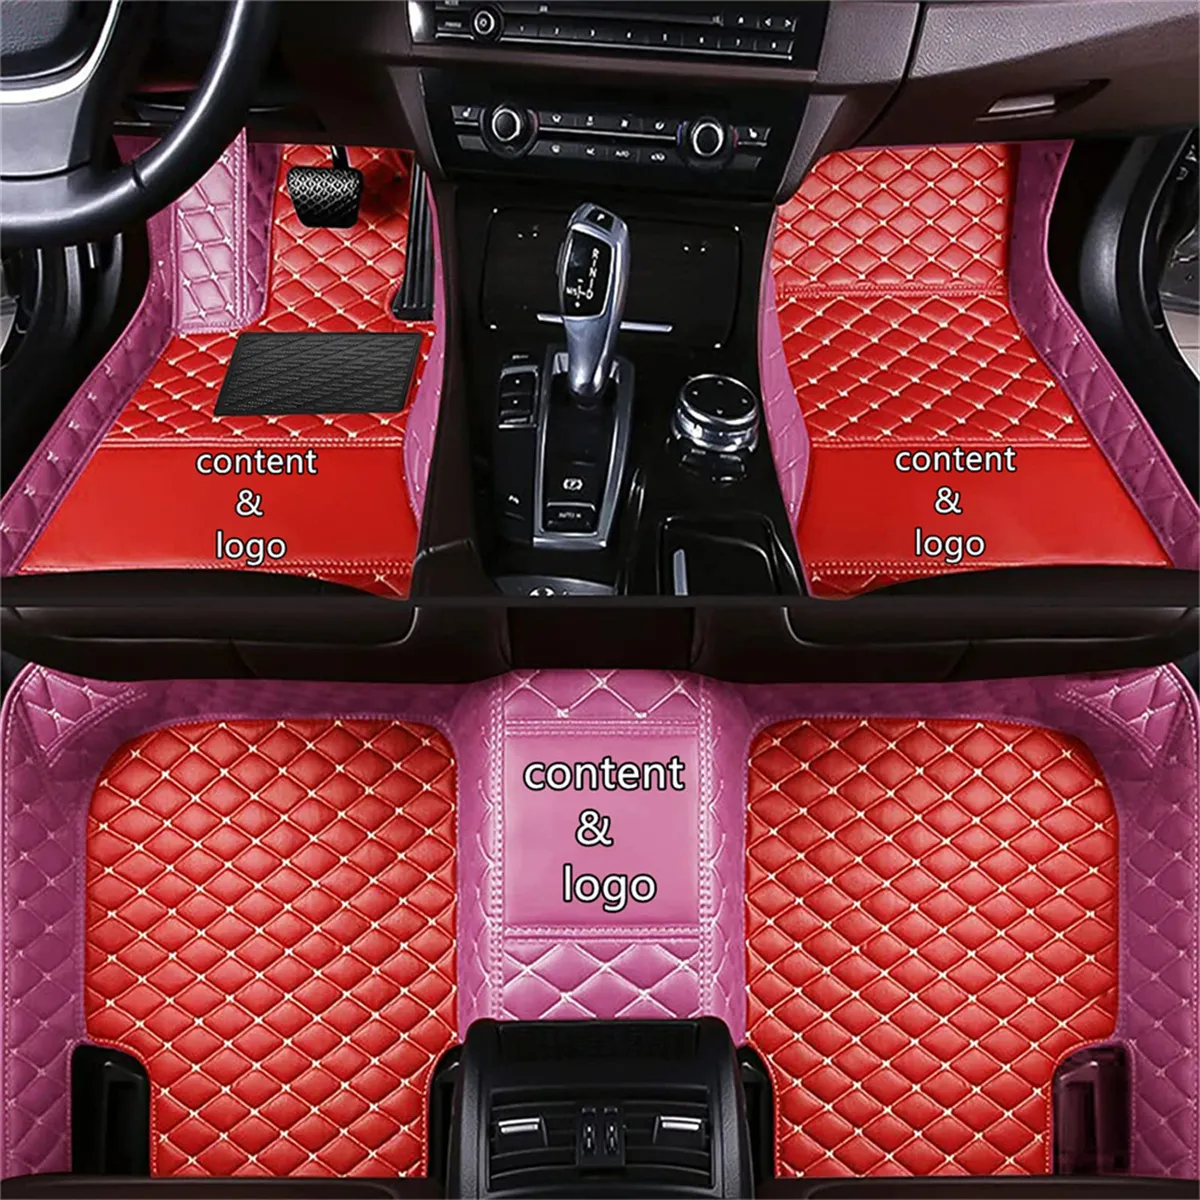 For Toyota Corolla XI 11th E170 2018 2017 2016 2015 2014 Car Floor Mats Accessories Protector Covers Leather Carpets Decoration